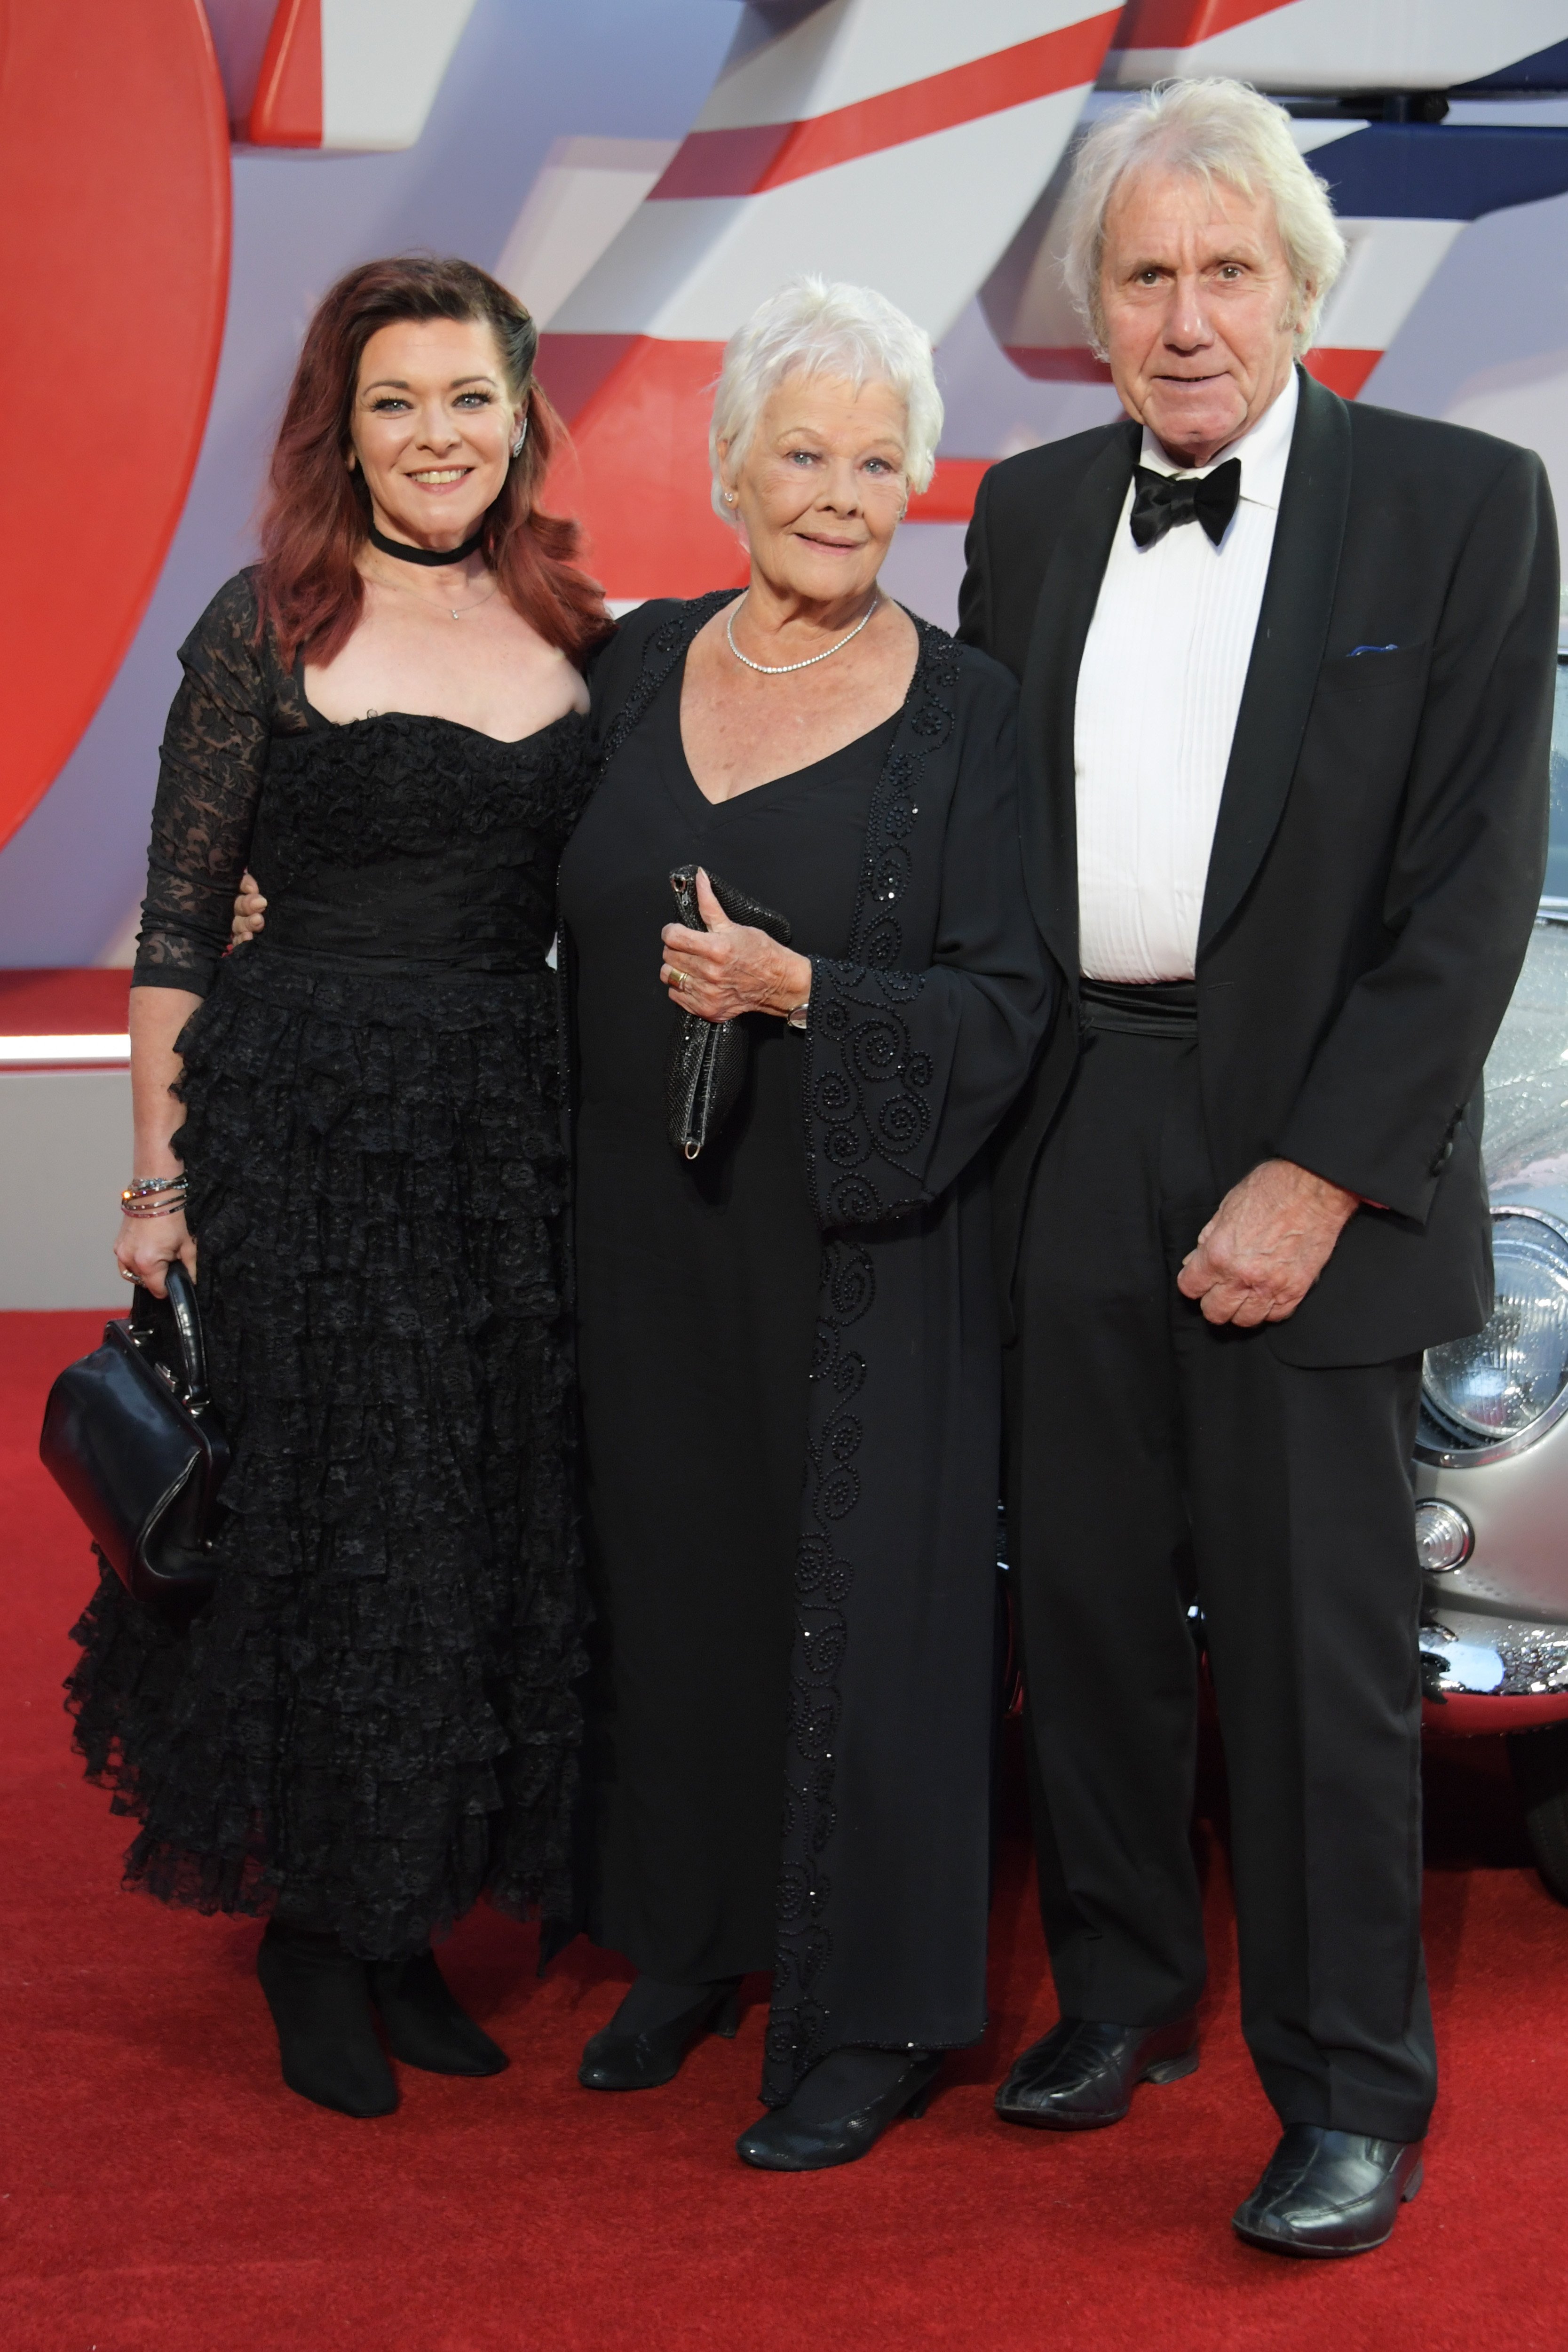 Finty Williams, Judi Dench and David Mills attend the World Premiere of "No Time To Die" at the Royal Albert Hall on September 28, 2021 in London, England ┃Source: Getty Images